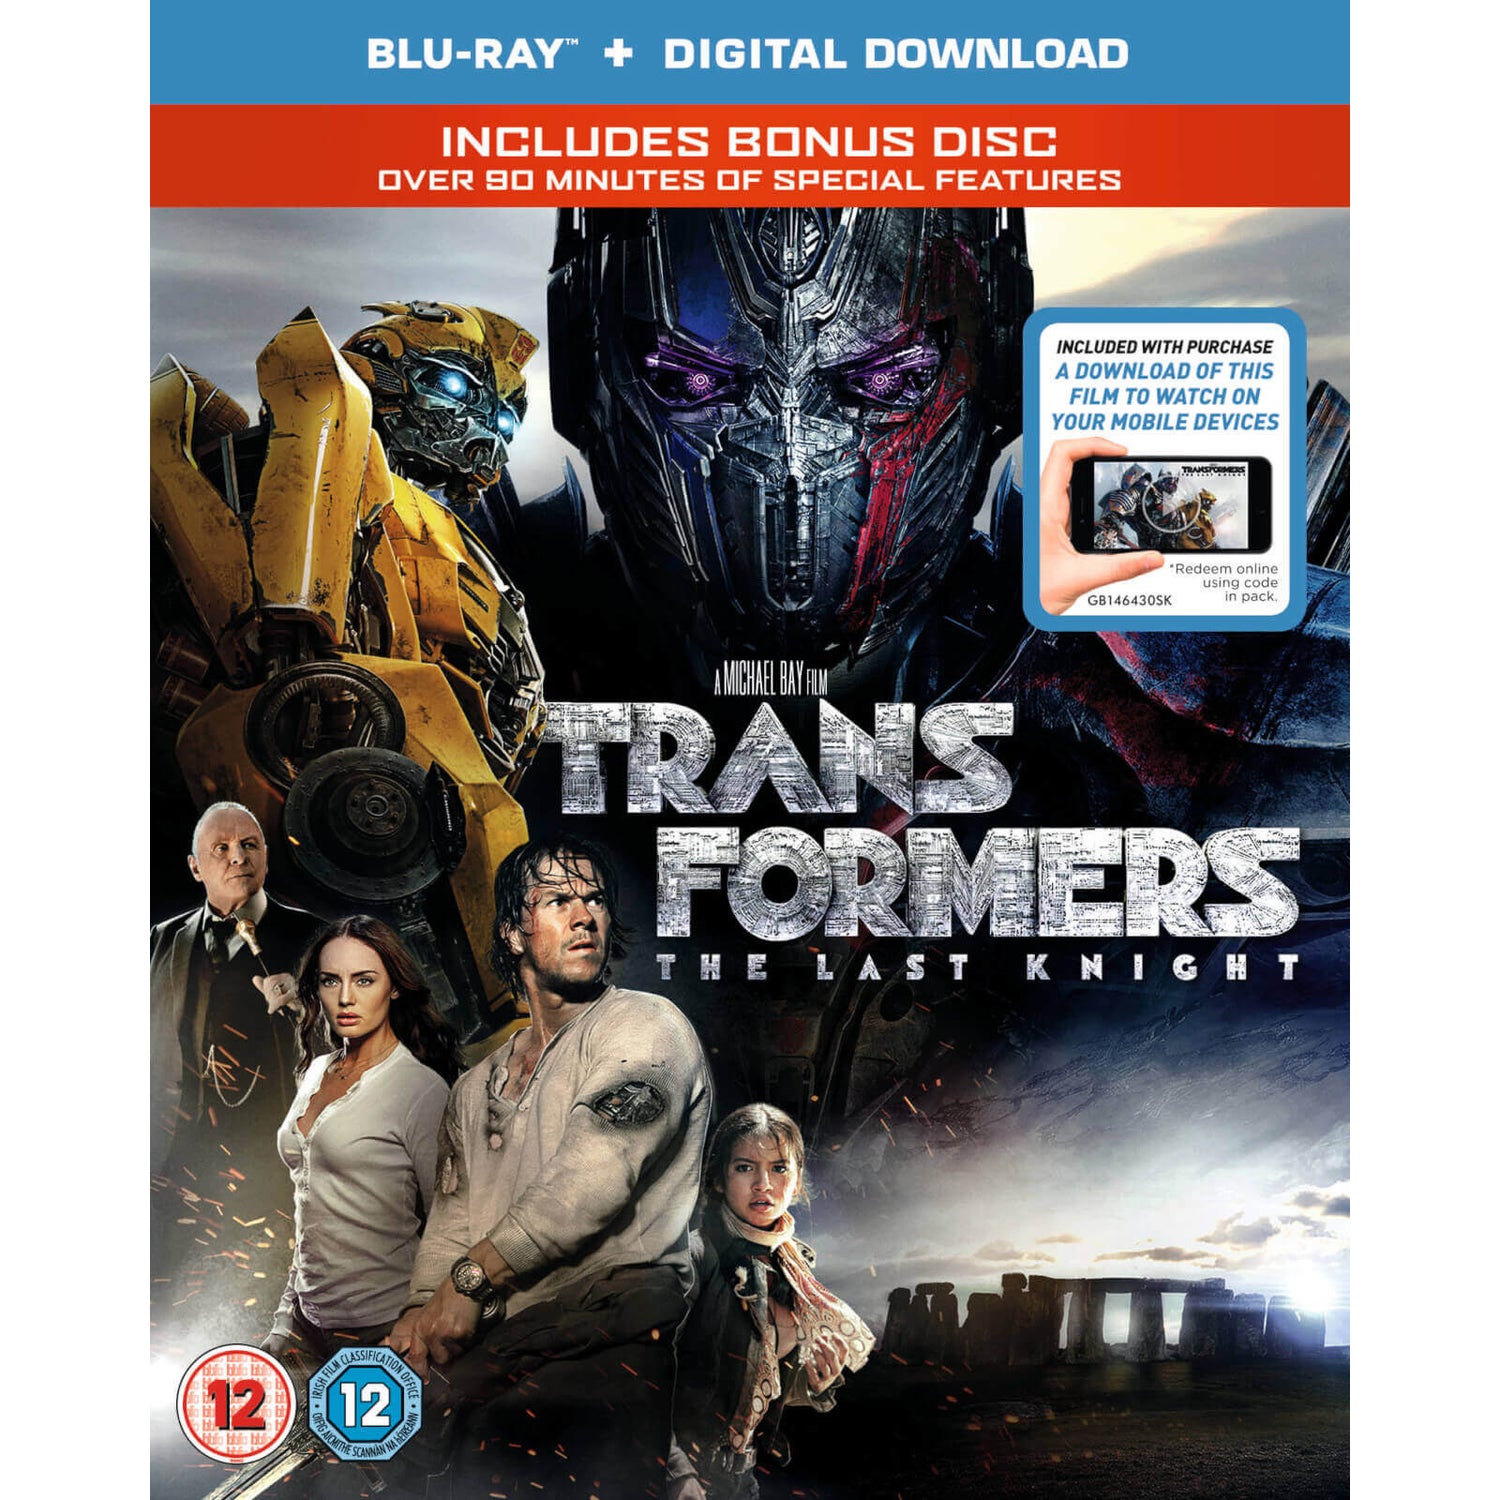 Transformers: The Last Knight (Includes Digital Download)